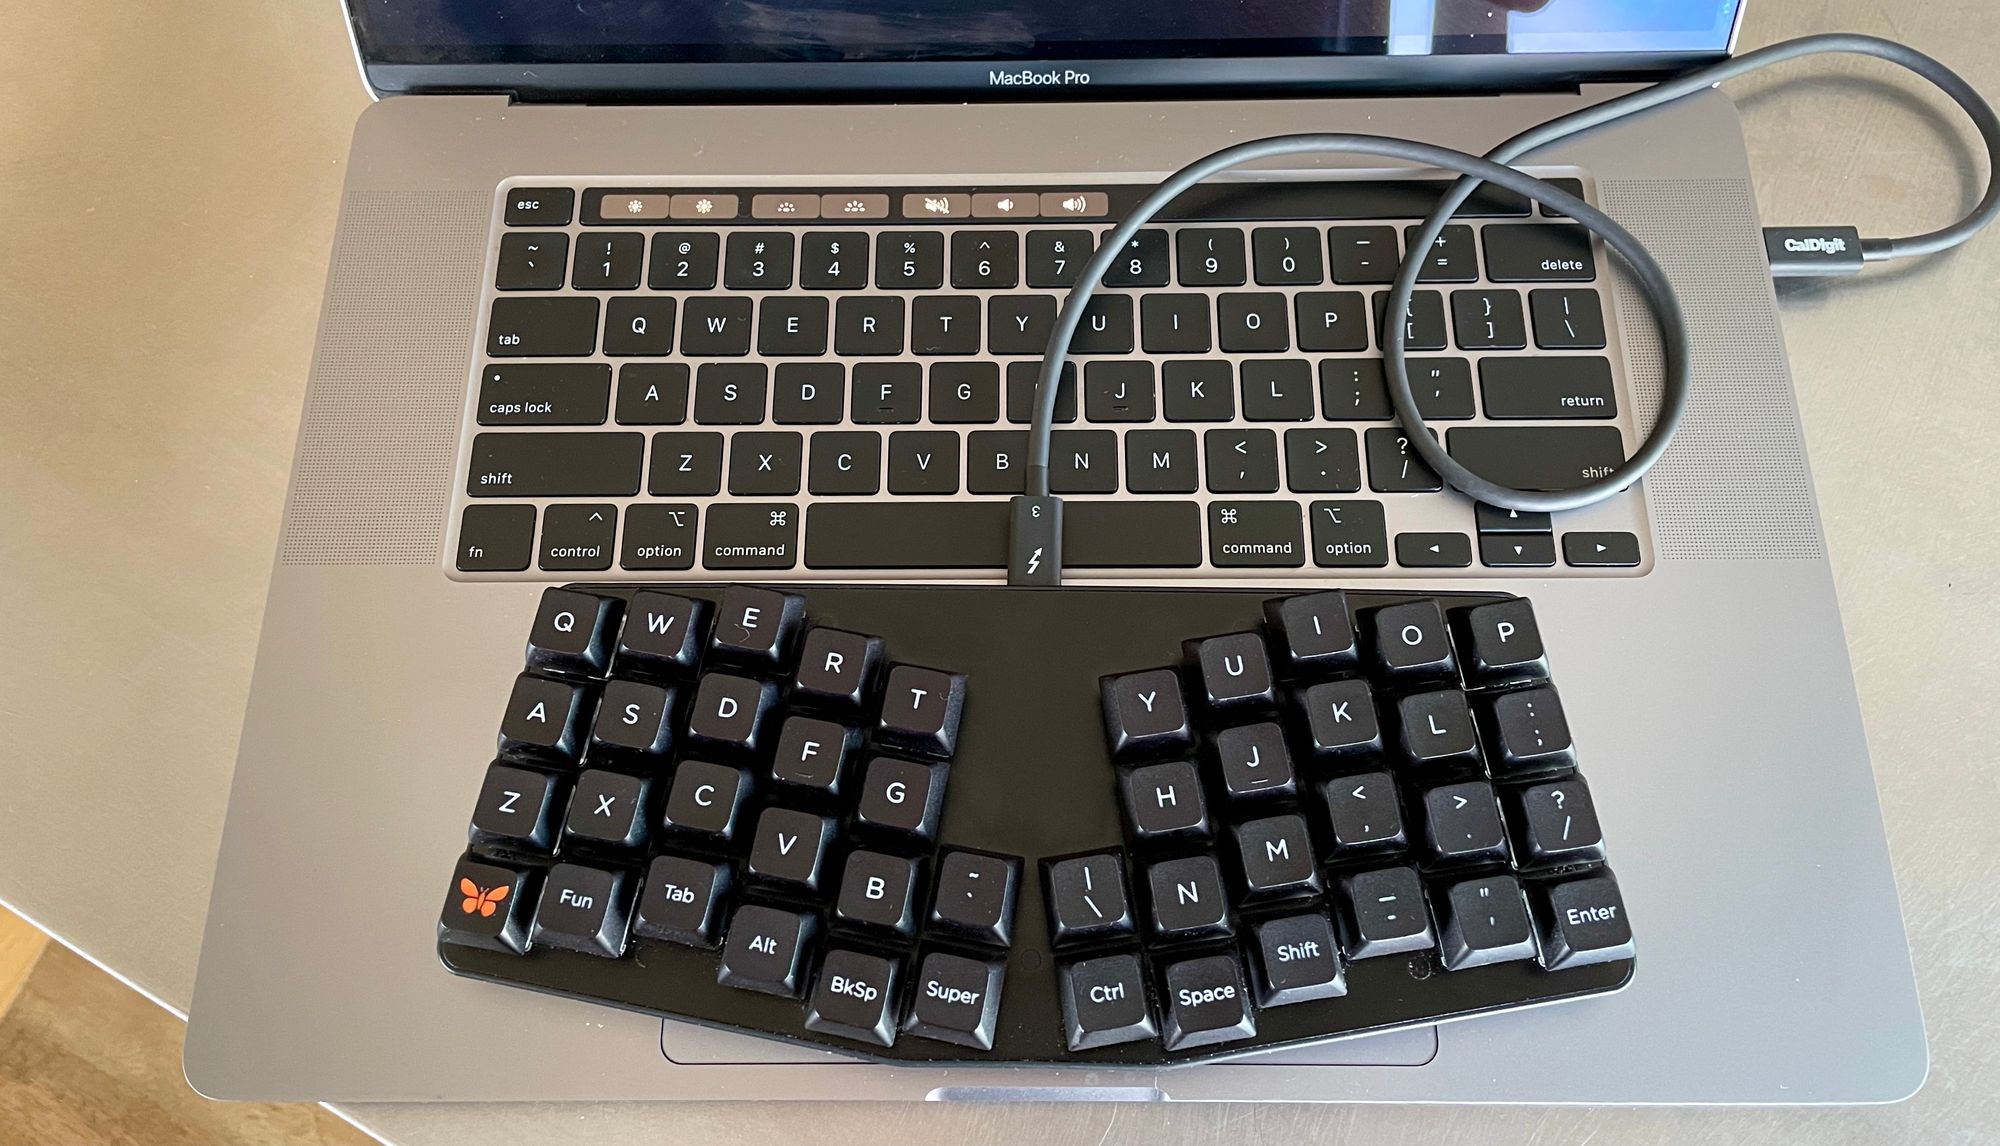 I don't have a small enough mouse to fit on the side, but I have seen people do this.